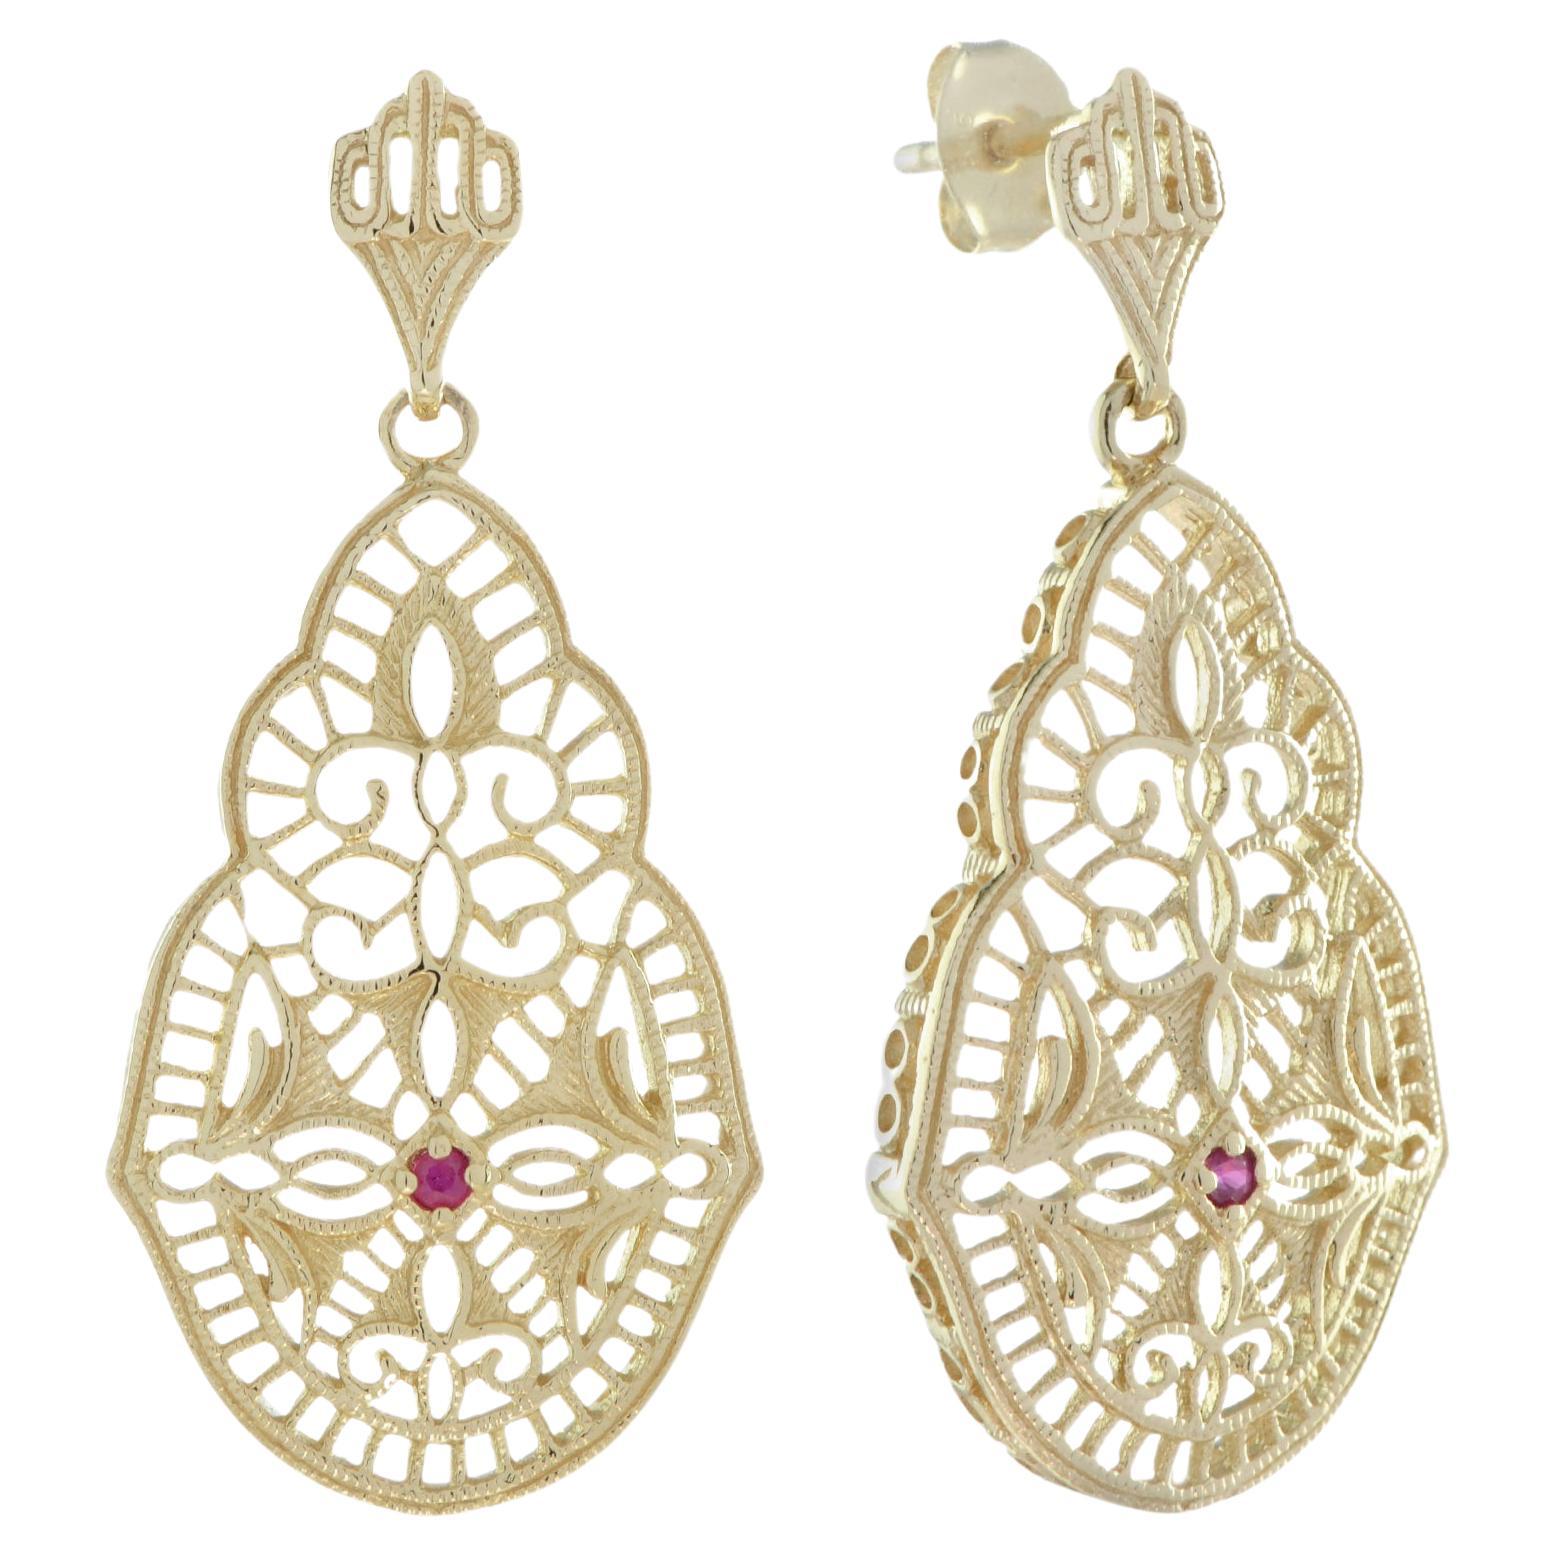 Natural Ruby Vintage Style Filigree Dangle Earrings in Solid 9K Gold